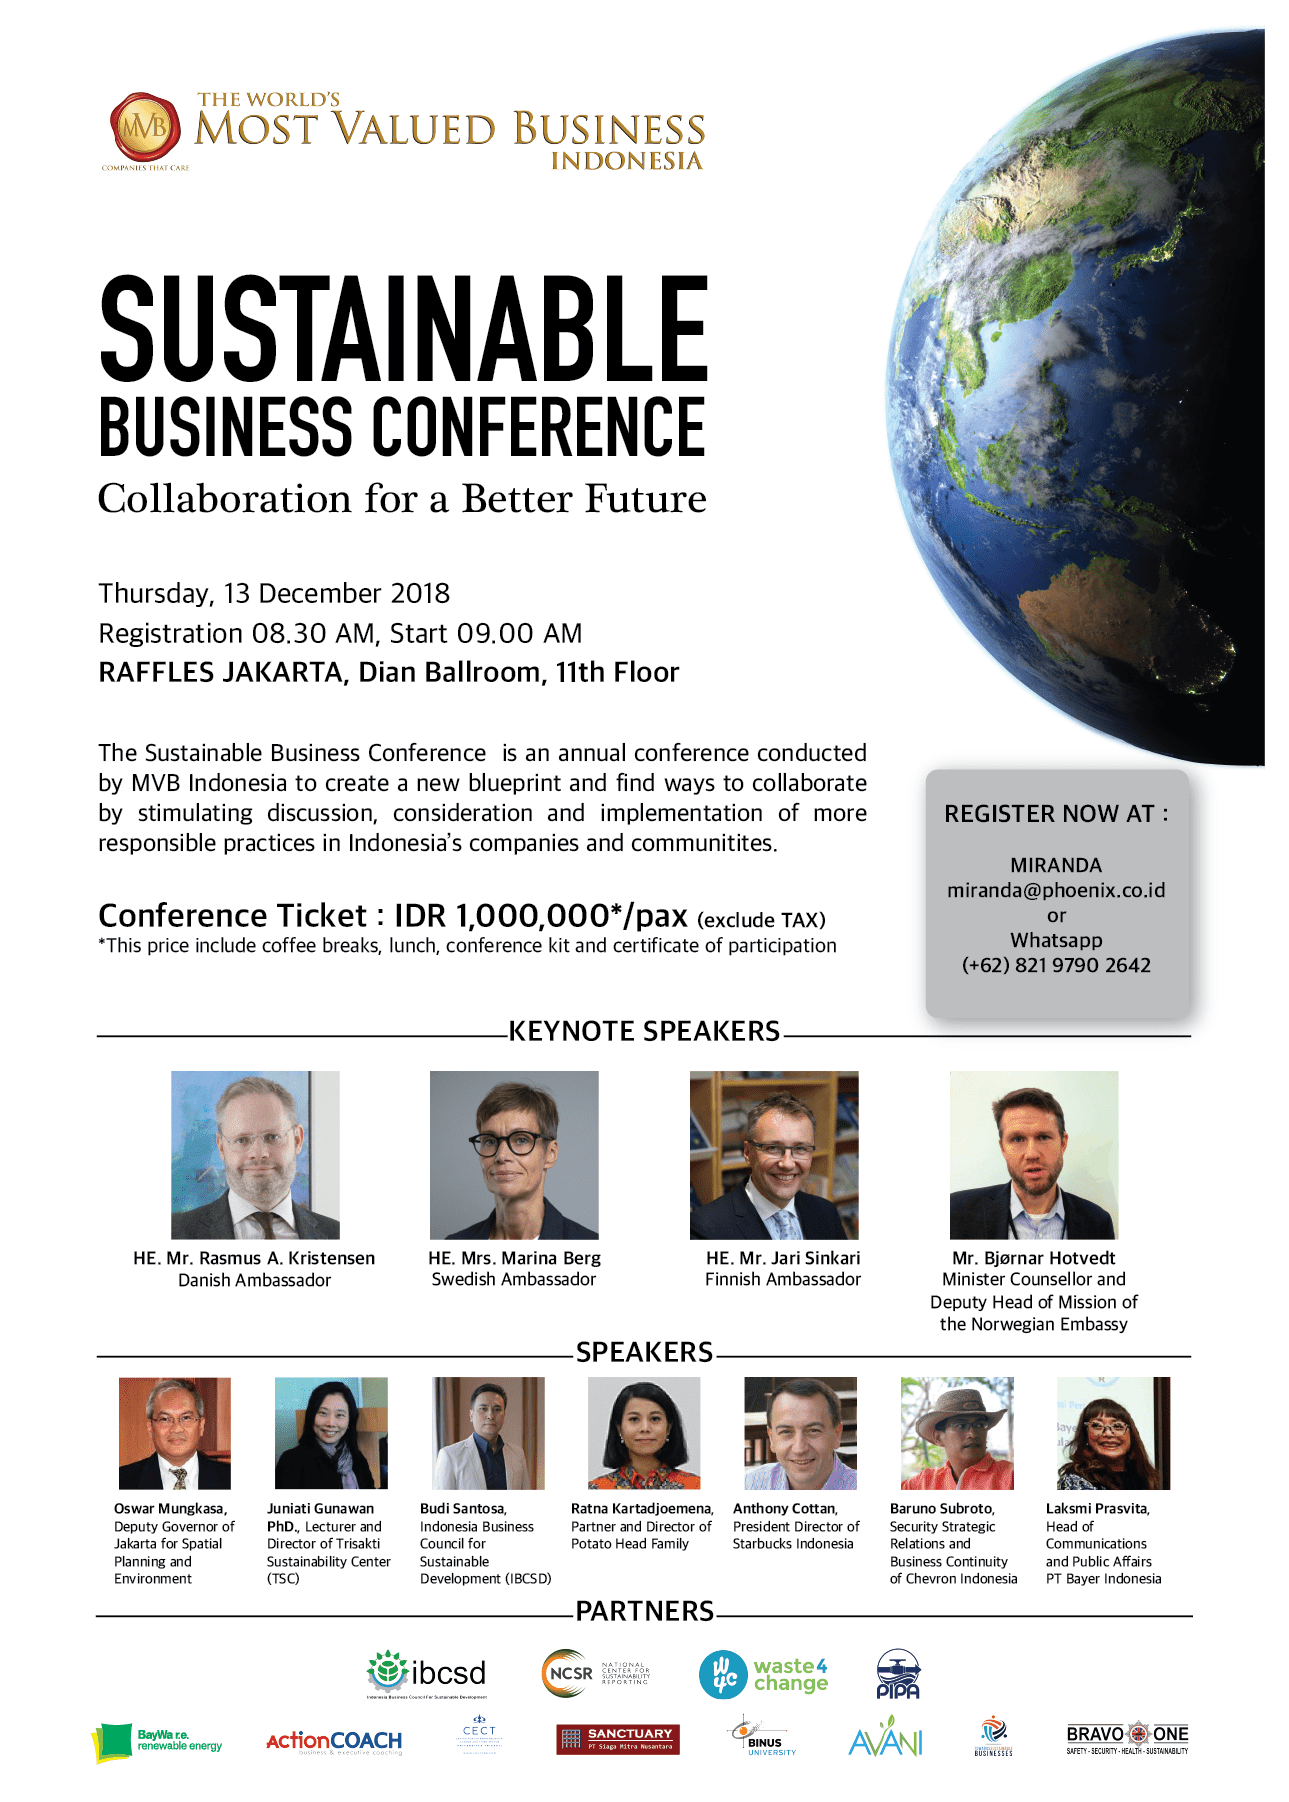 MVB SUSTAINABLE BUSINESS CONFERENCE 2018 : “COLLABORATION FOR A BETTER FUTURE”